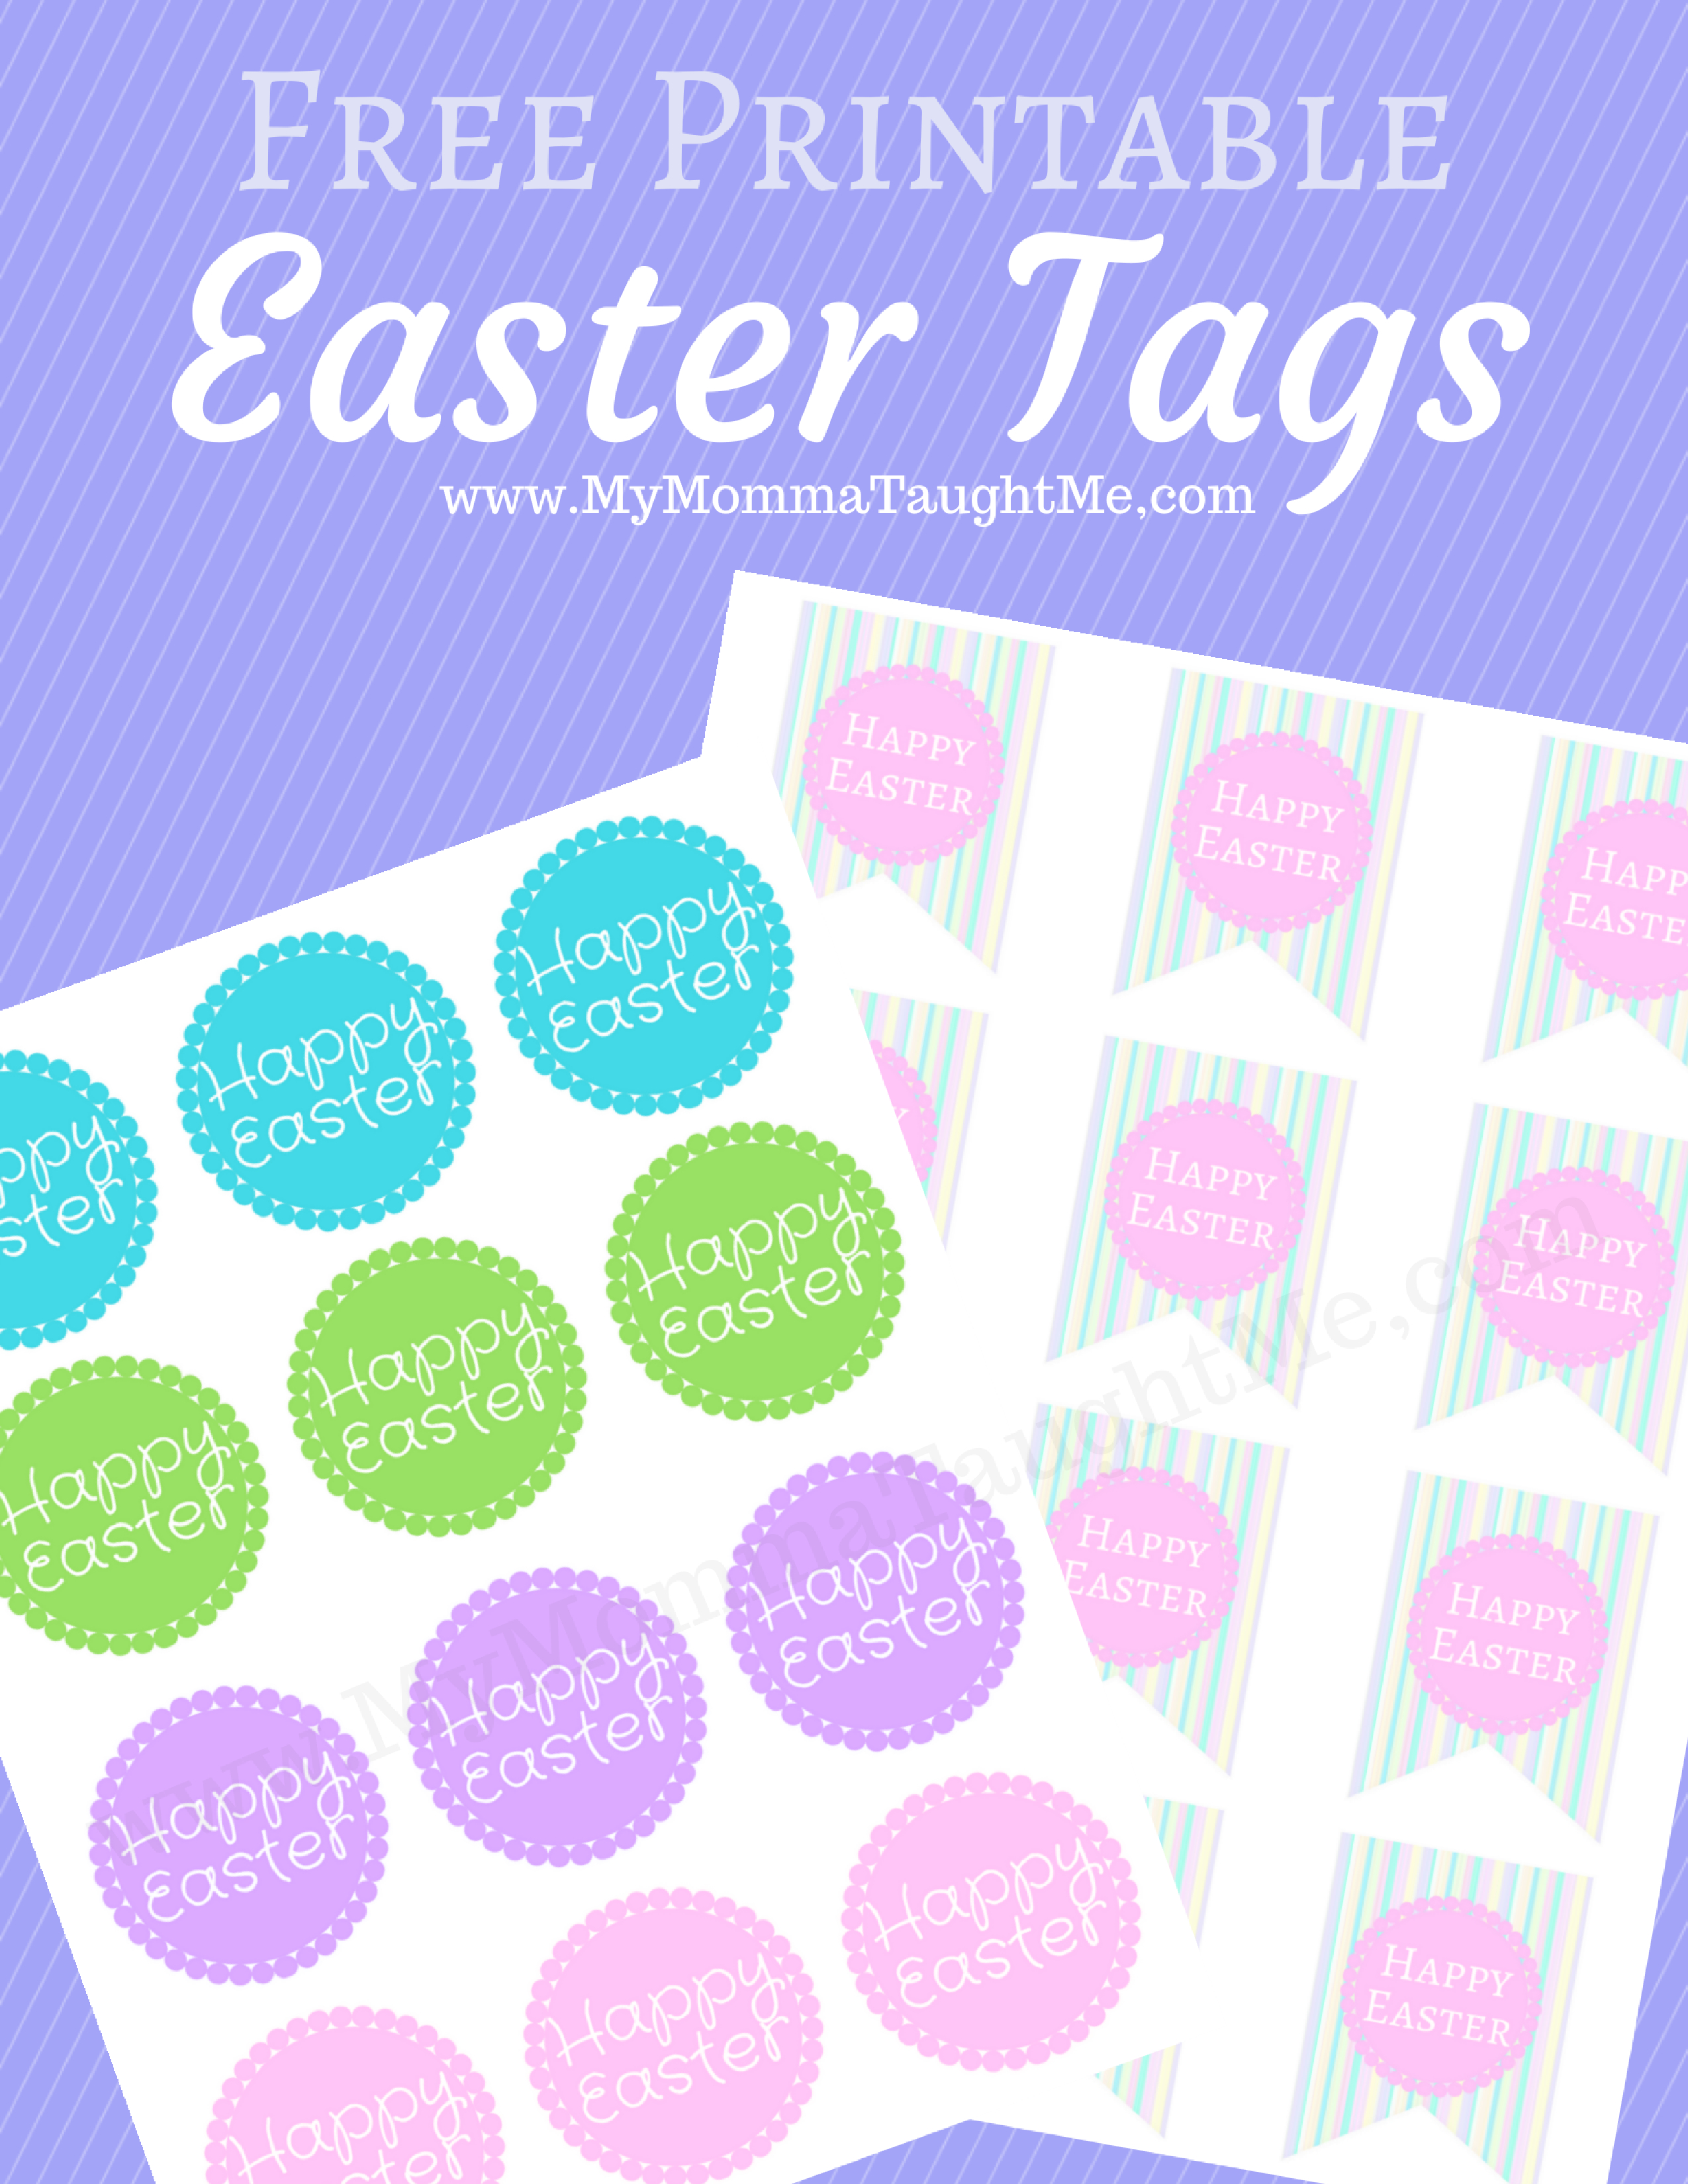 2 Different Free Printable Happy Easter Tags - My Momma Taught Me - Free Printable Easter Tags